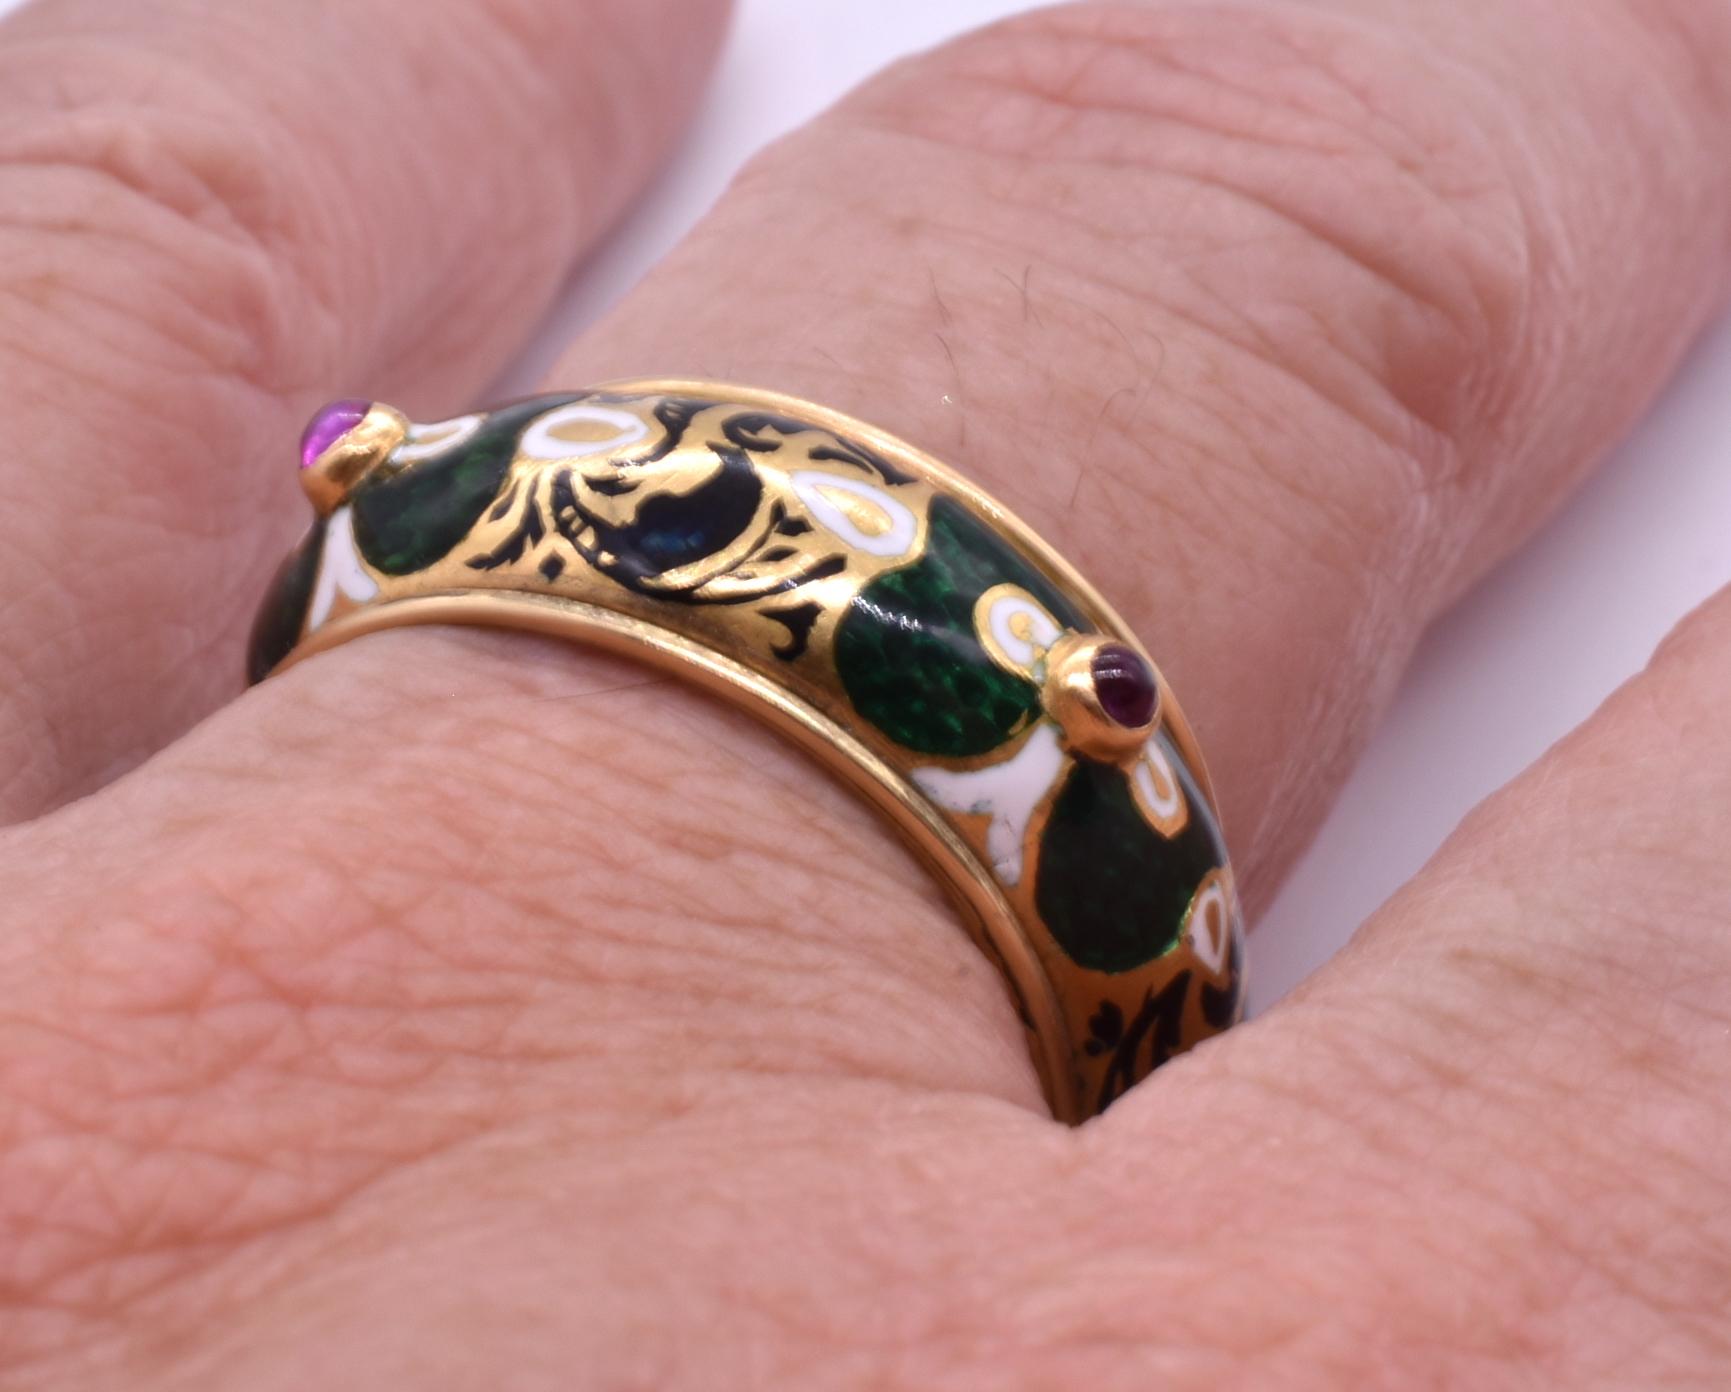 One of a kind antique renaissance revival 18k gold, ruby and green painted enamel  band.  The ring has 4 small rubies spaced around each corner of the band. The ring is US size 10 ½.